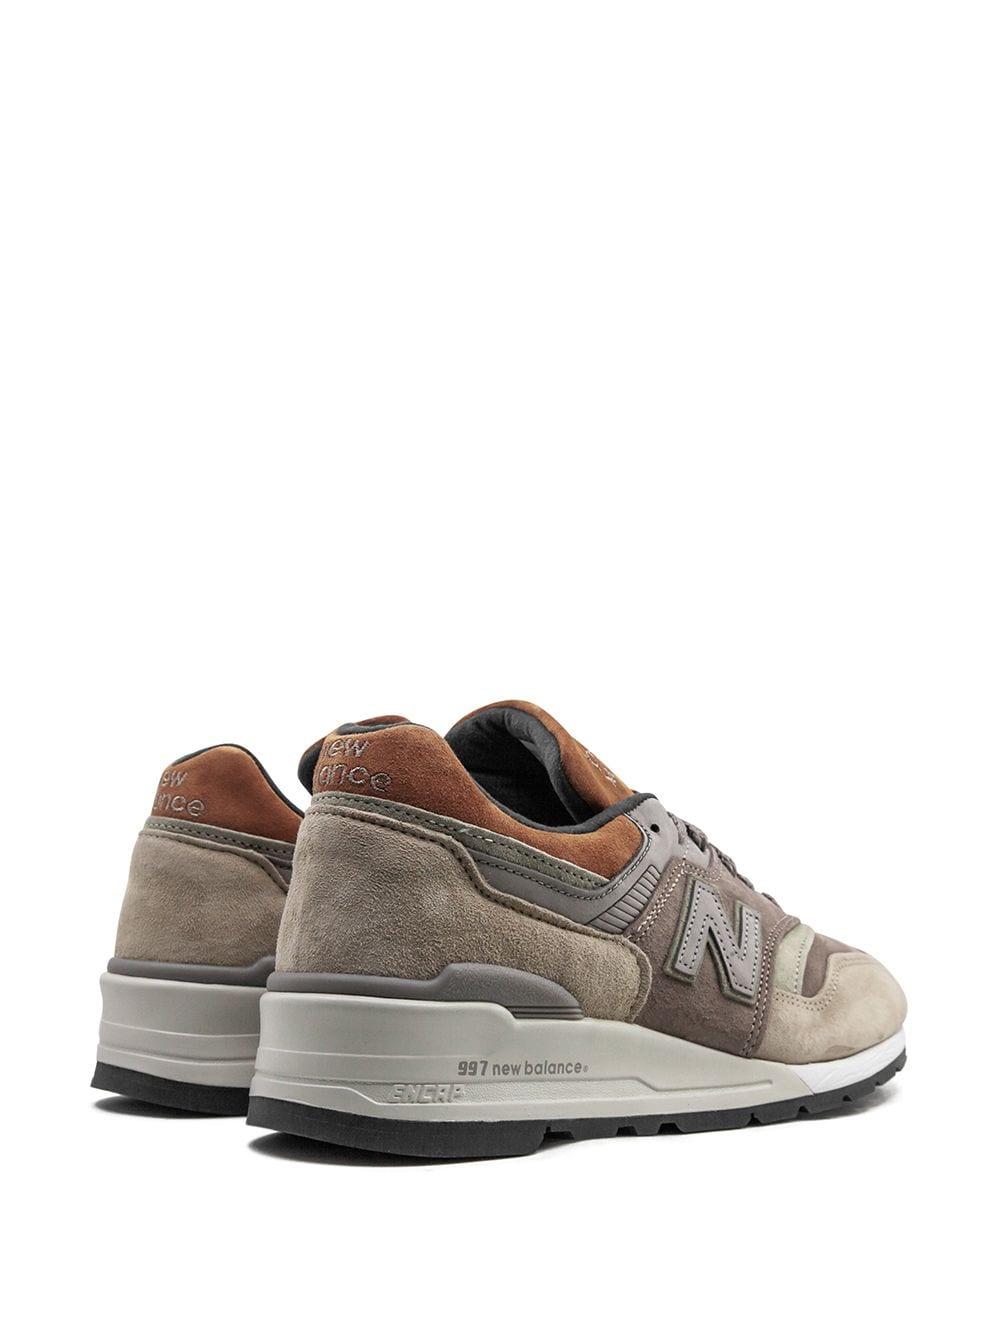 New Balance Suede 997 Made In Usa 'earth Tones' Sneakers for Men | Lyst